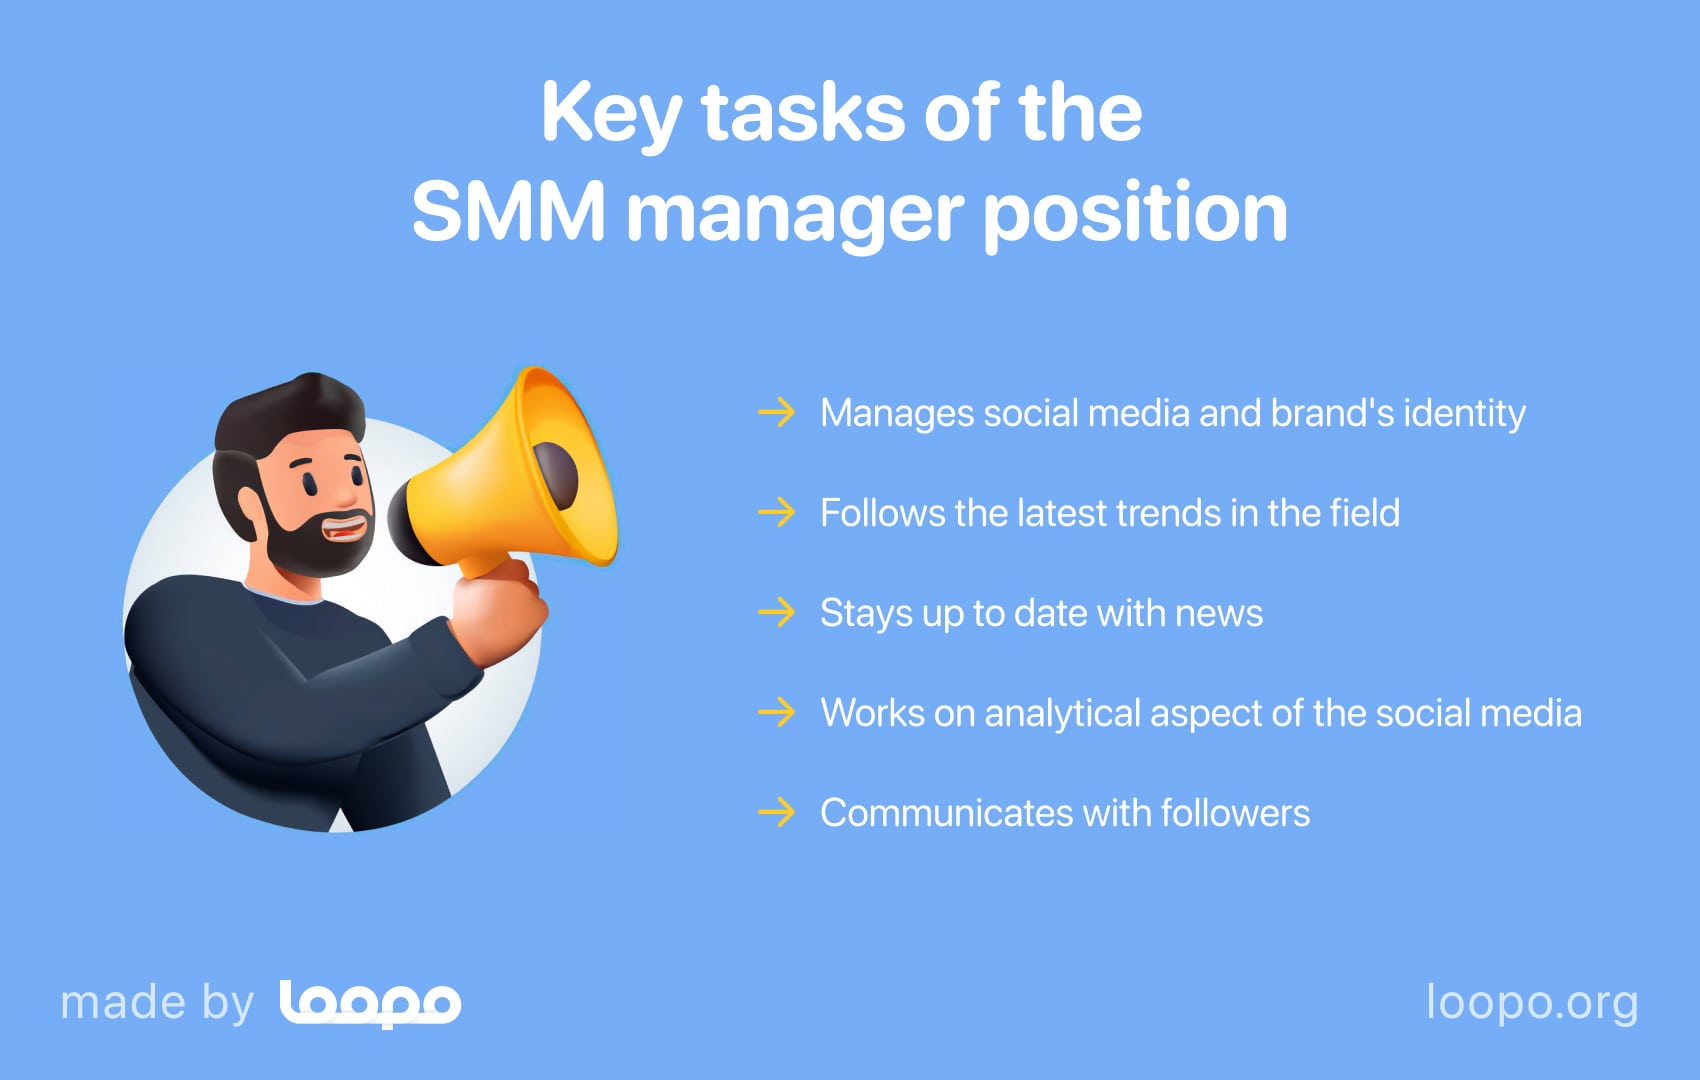 SMM manager's main responsibilities